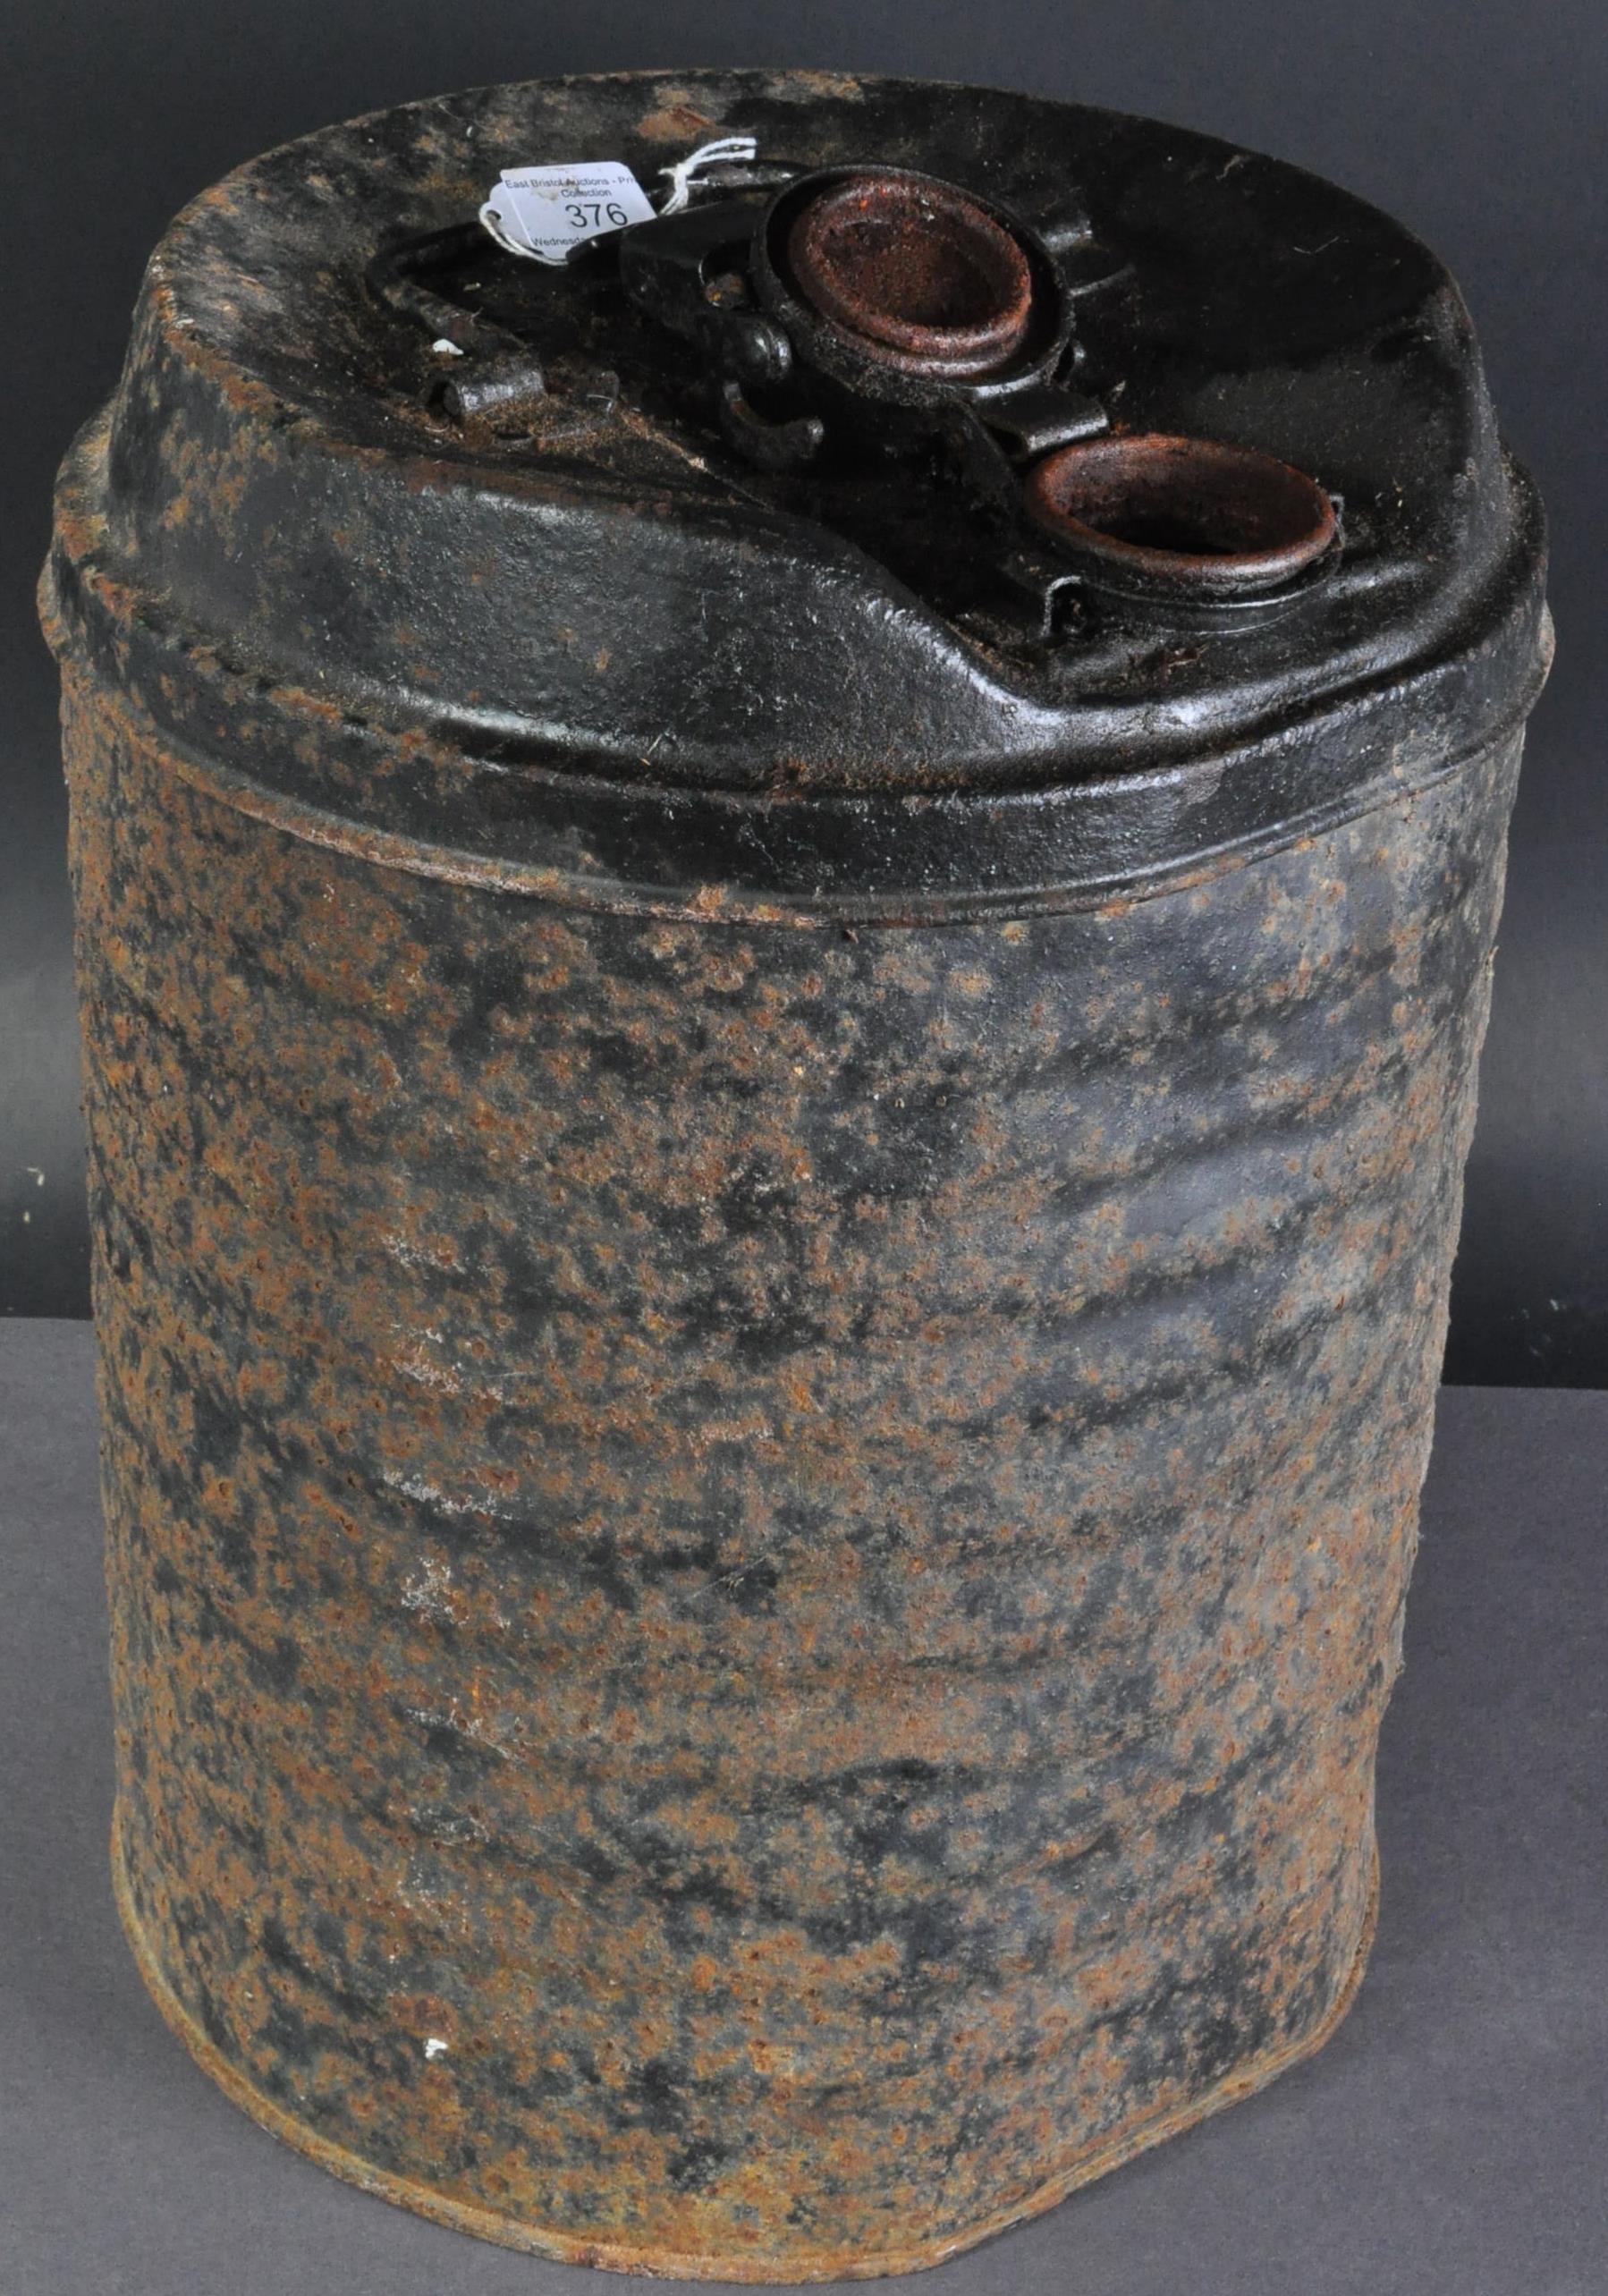 WWII SECOND WORLD WAR PERIOD LARGE CIRCULAR PETROL CAN - Image 2 of 4